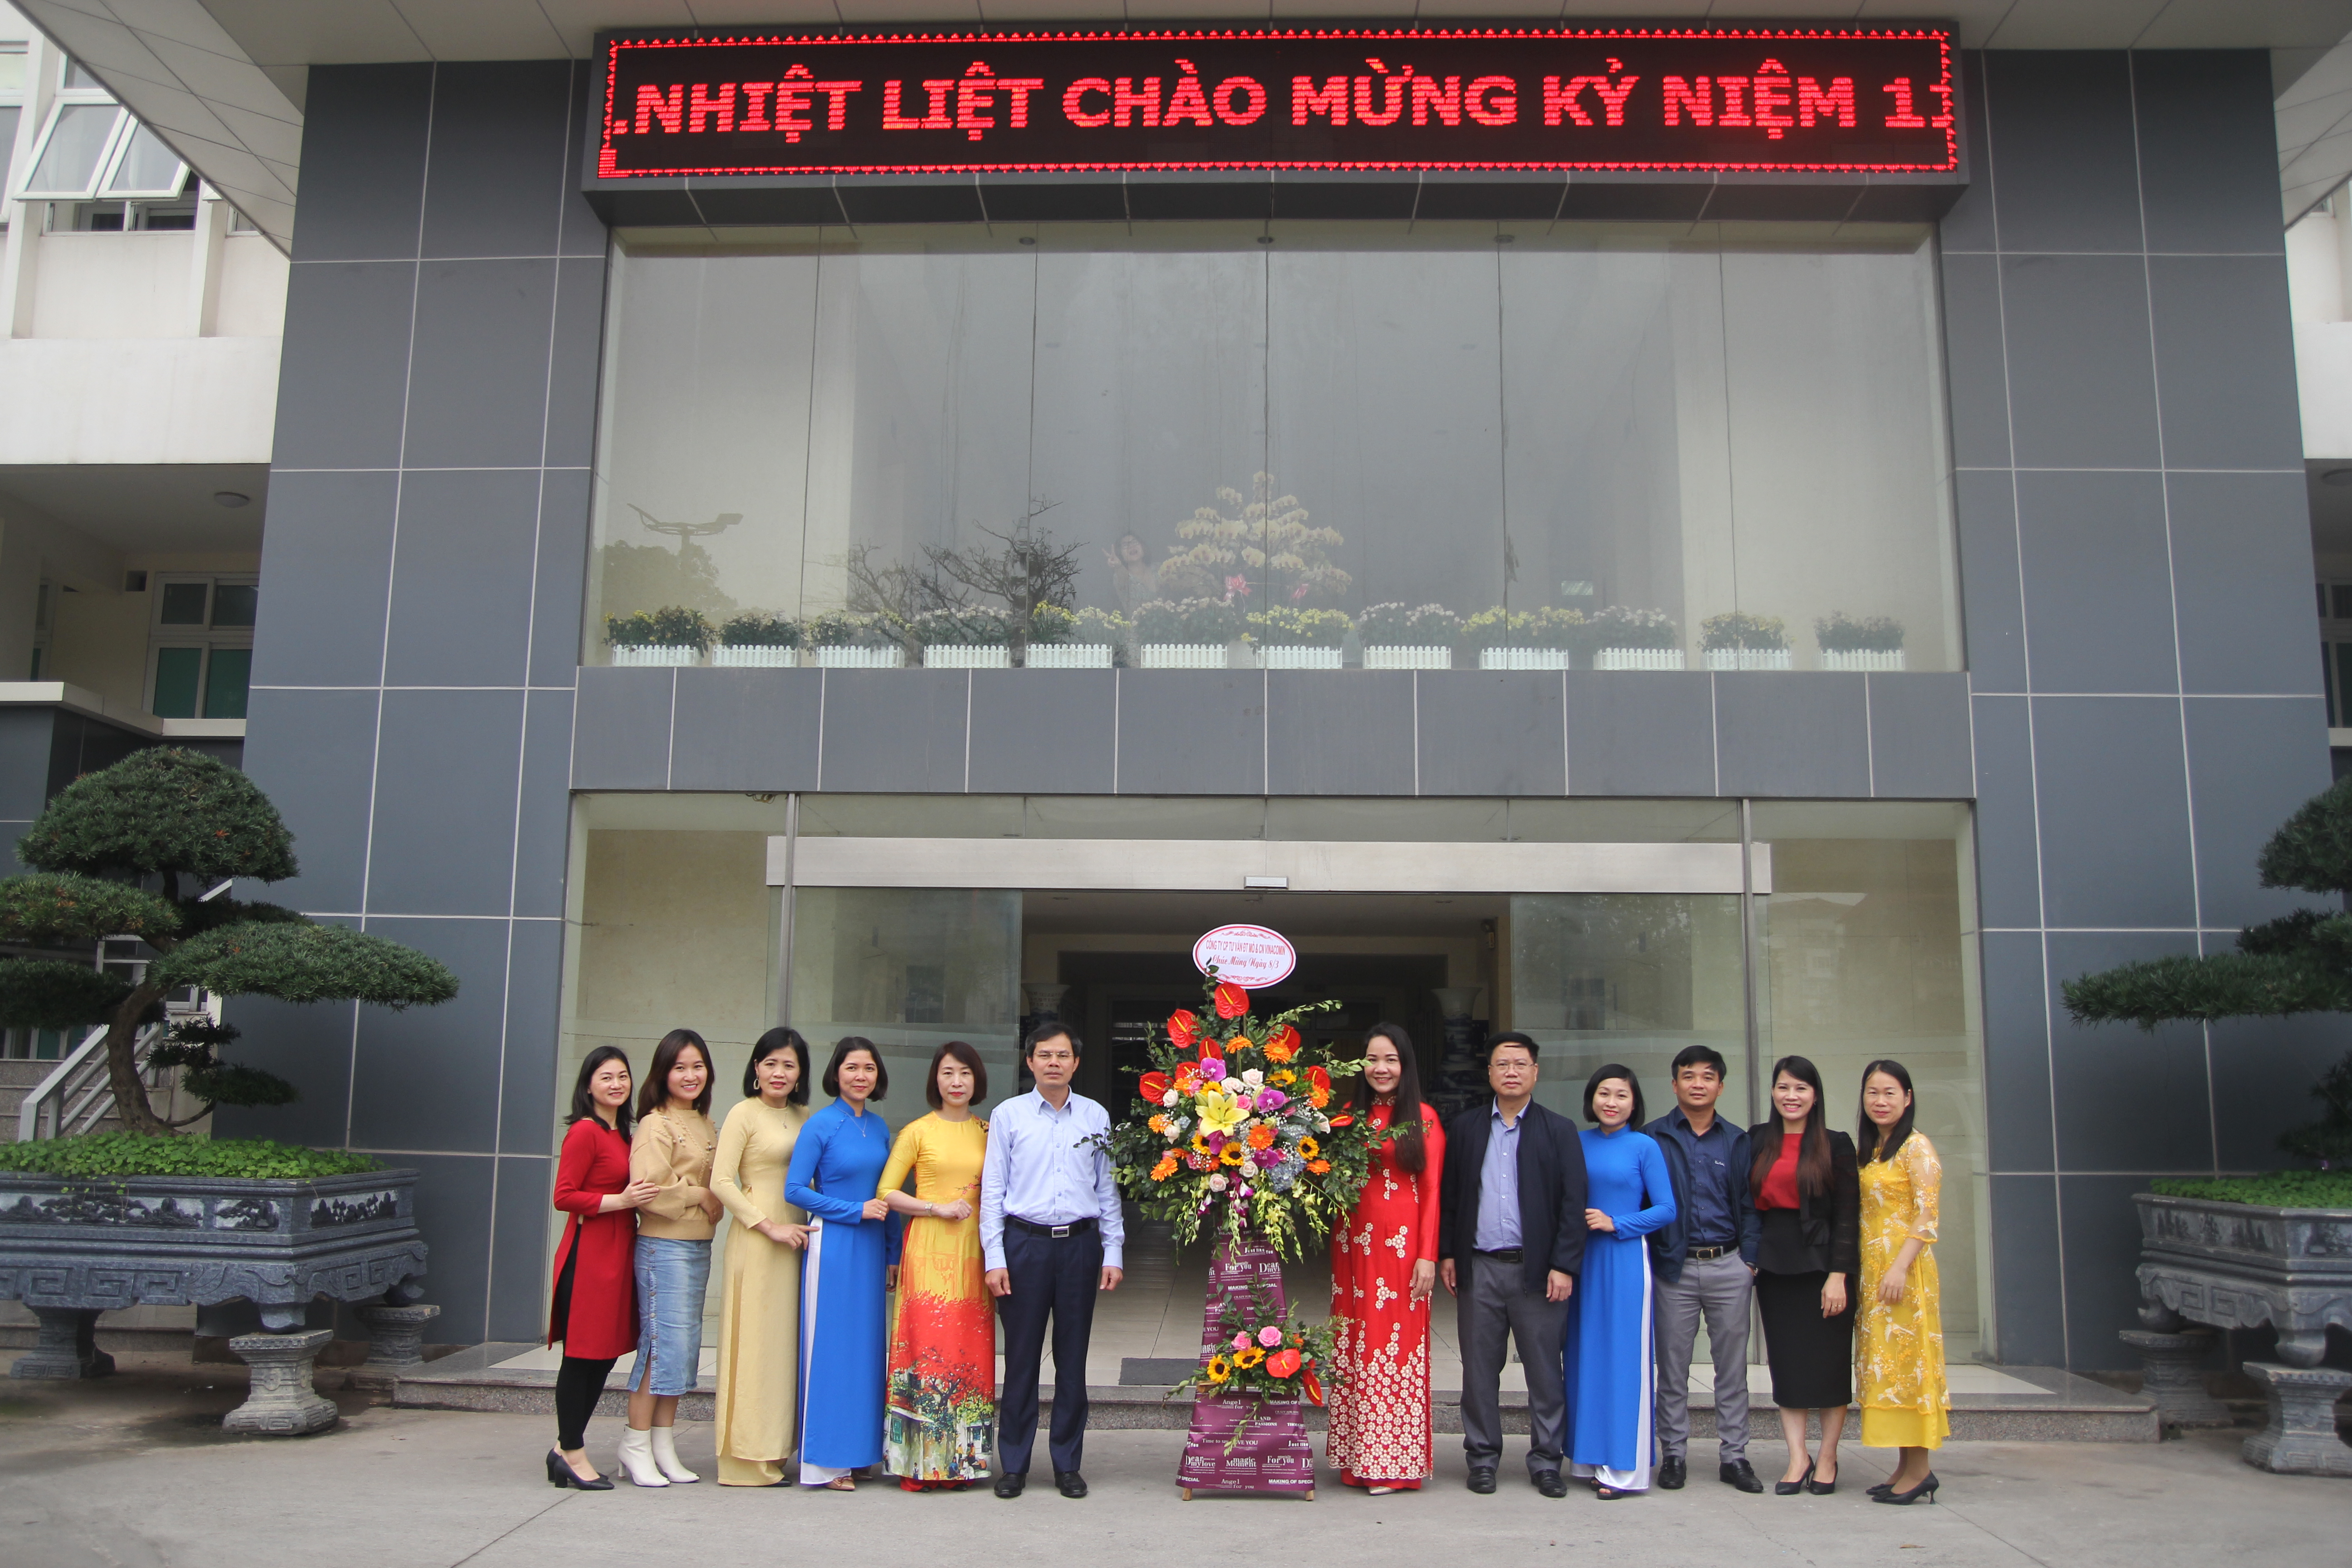 VIMCC EXECUTIVE BOARD PRESENTS FLOWERS TO AND SENDS GREETINGS TO FEMALE EMPLOYEES ON OCCASION OF INTERNATIONAL WOMEN’S DAY (MARCH 8)